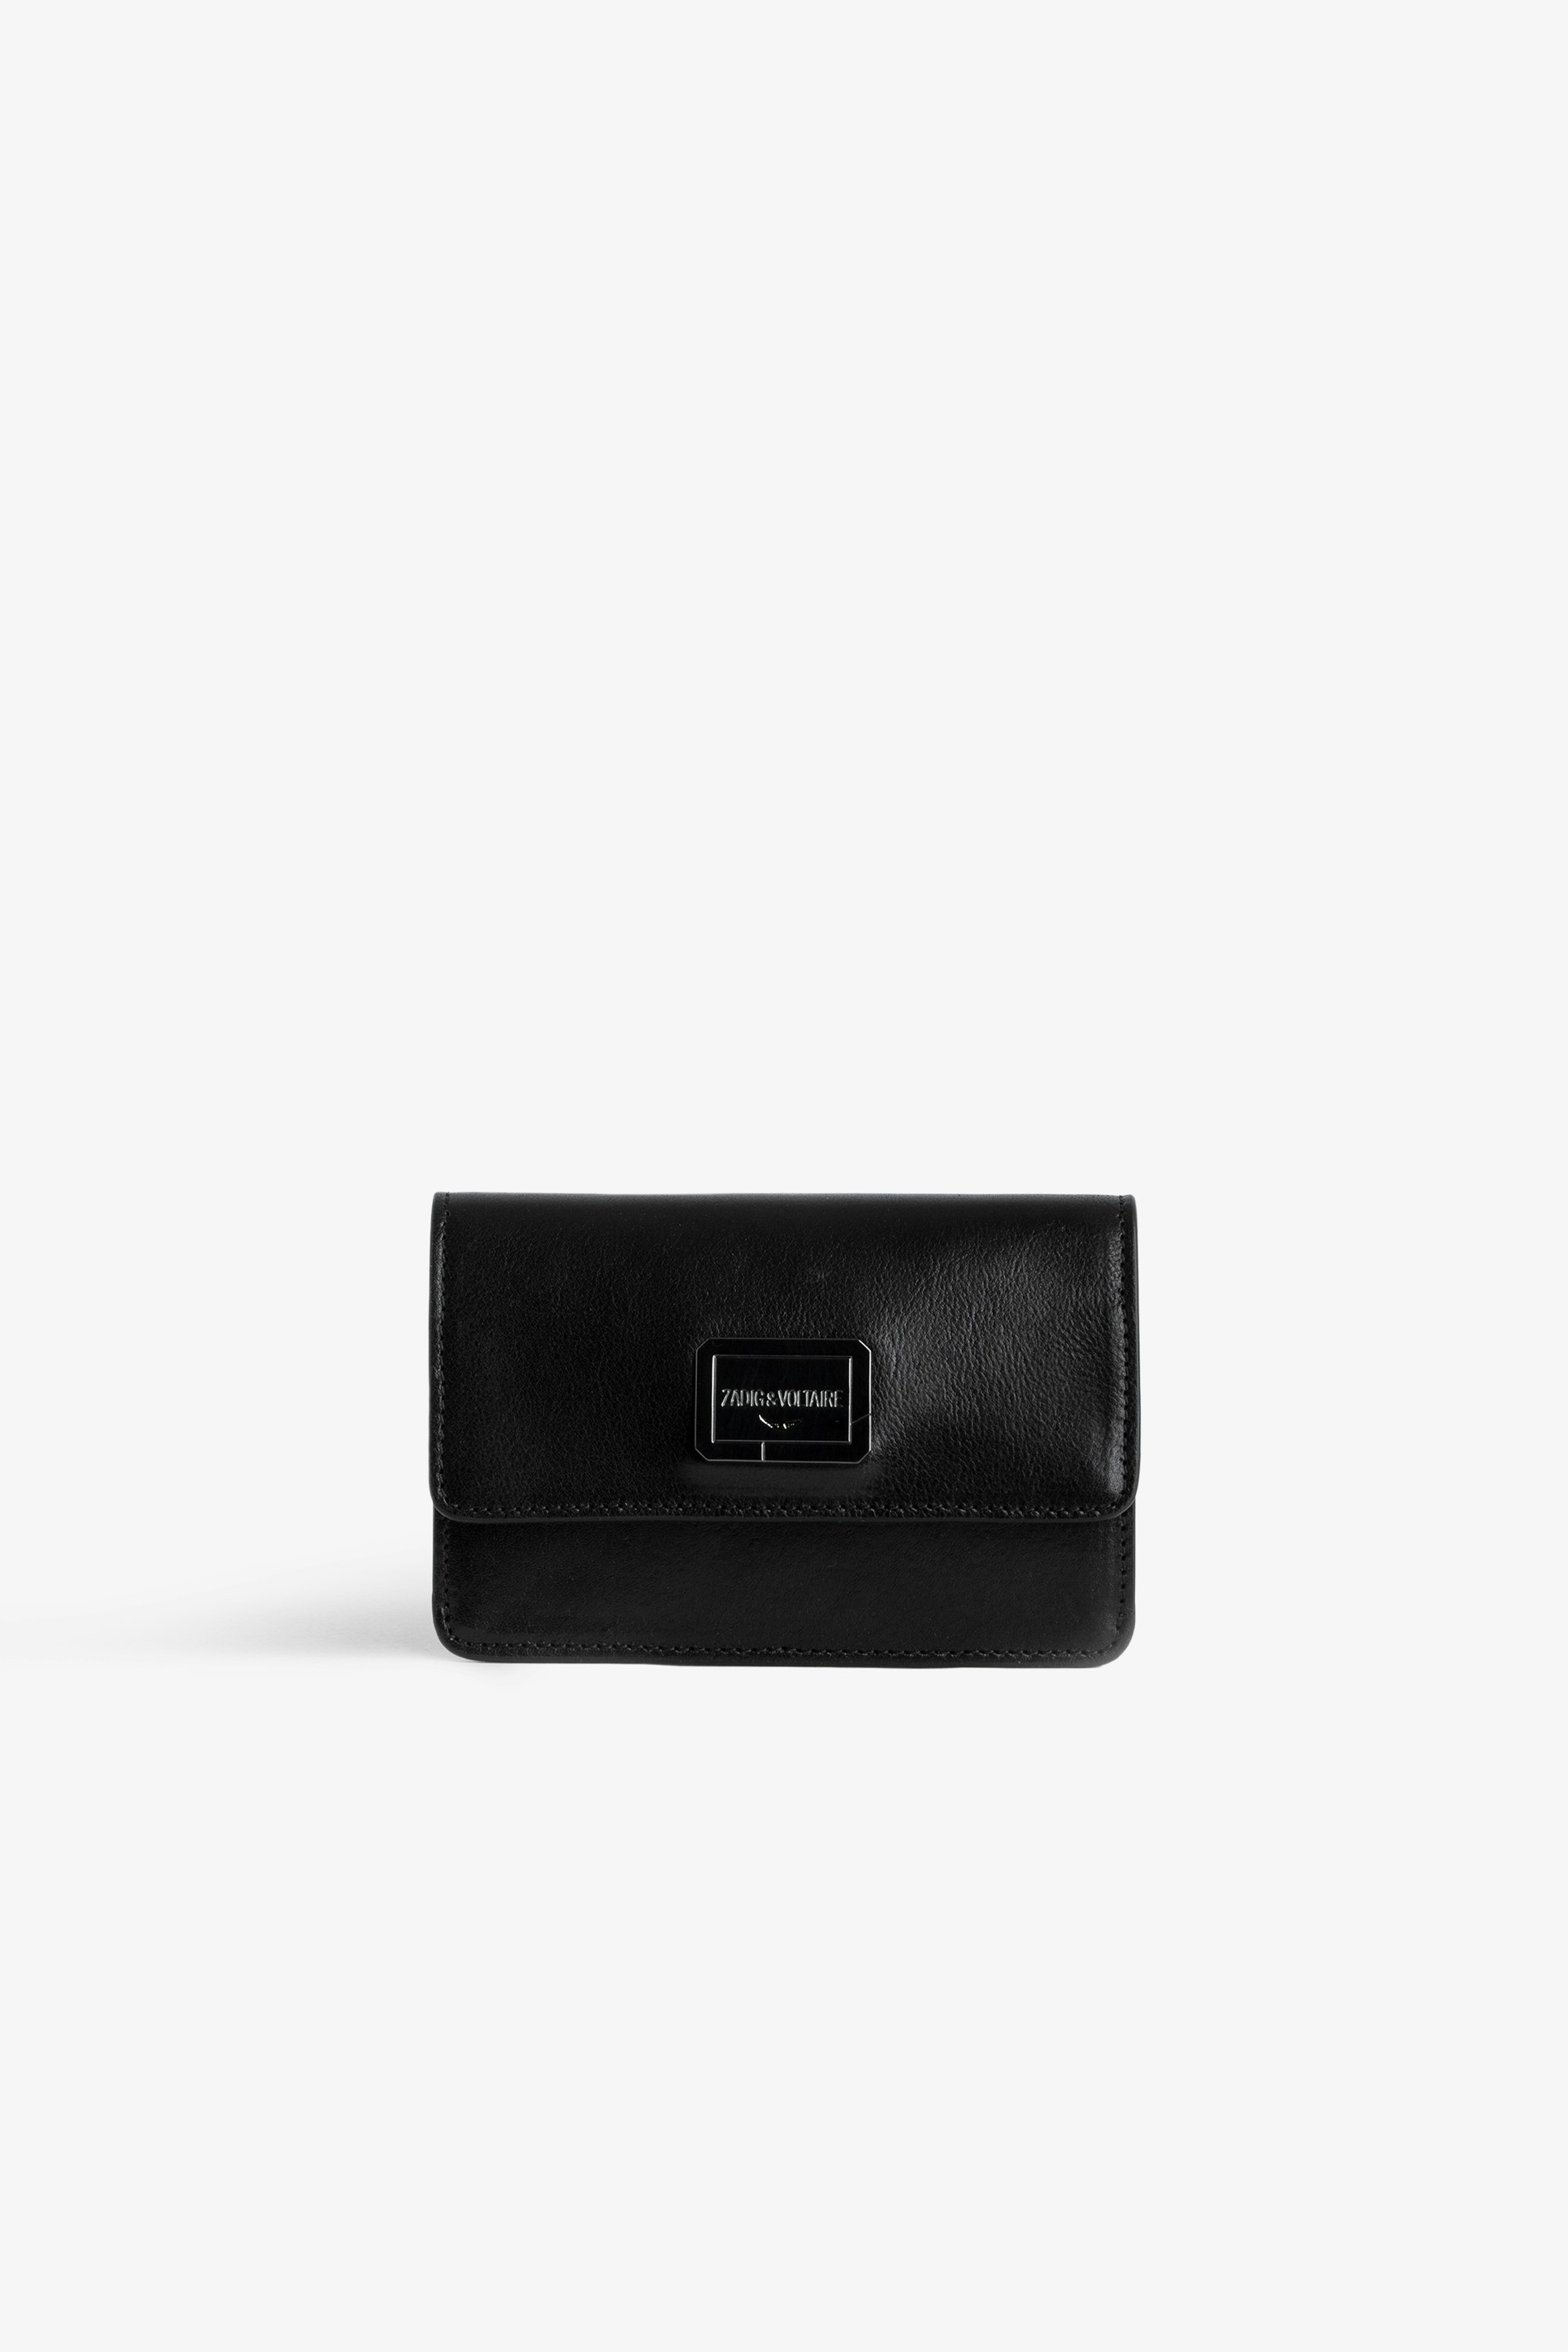 Le Cecilia Wallet - Women's black leather wallet with flap.